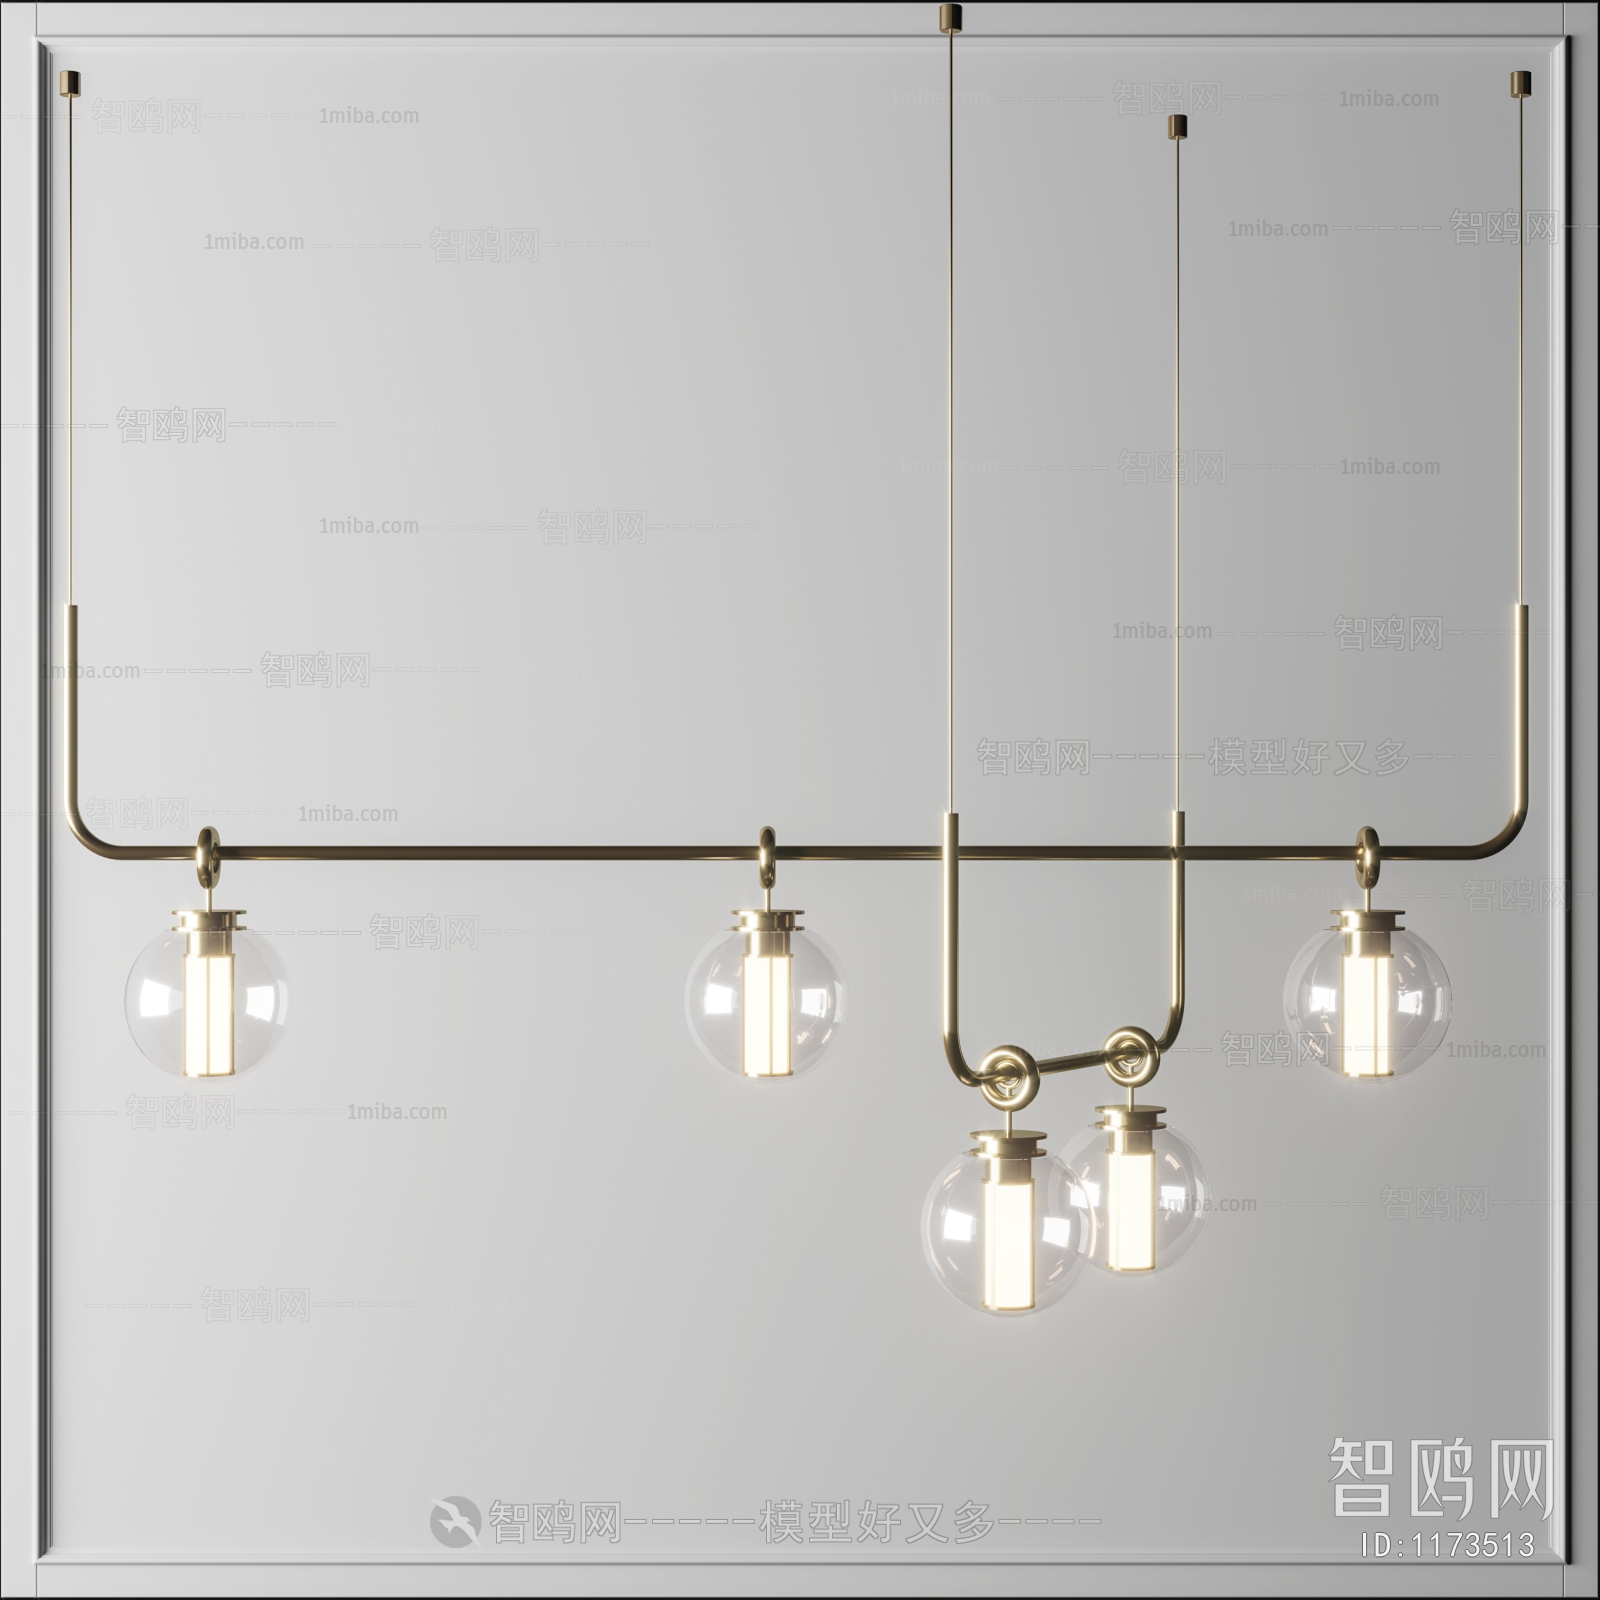 New Chinese Style Droplight